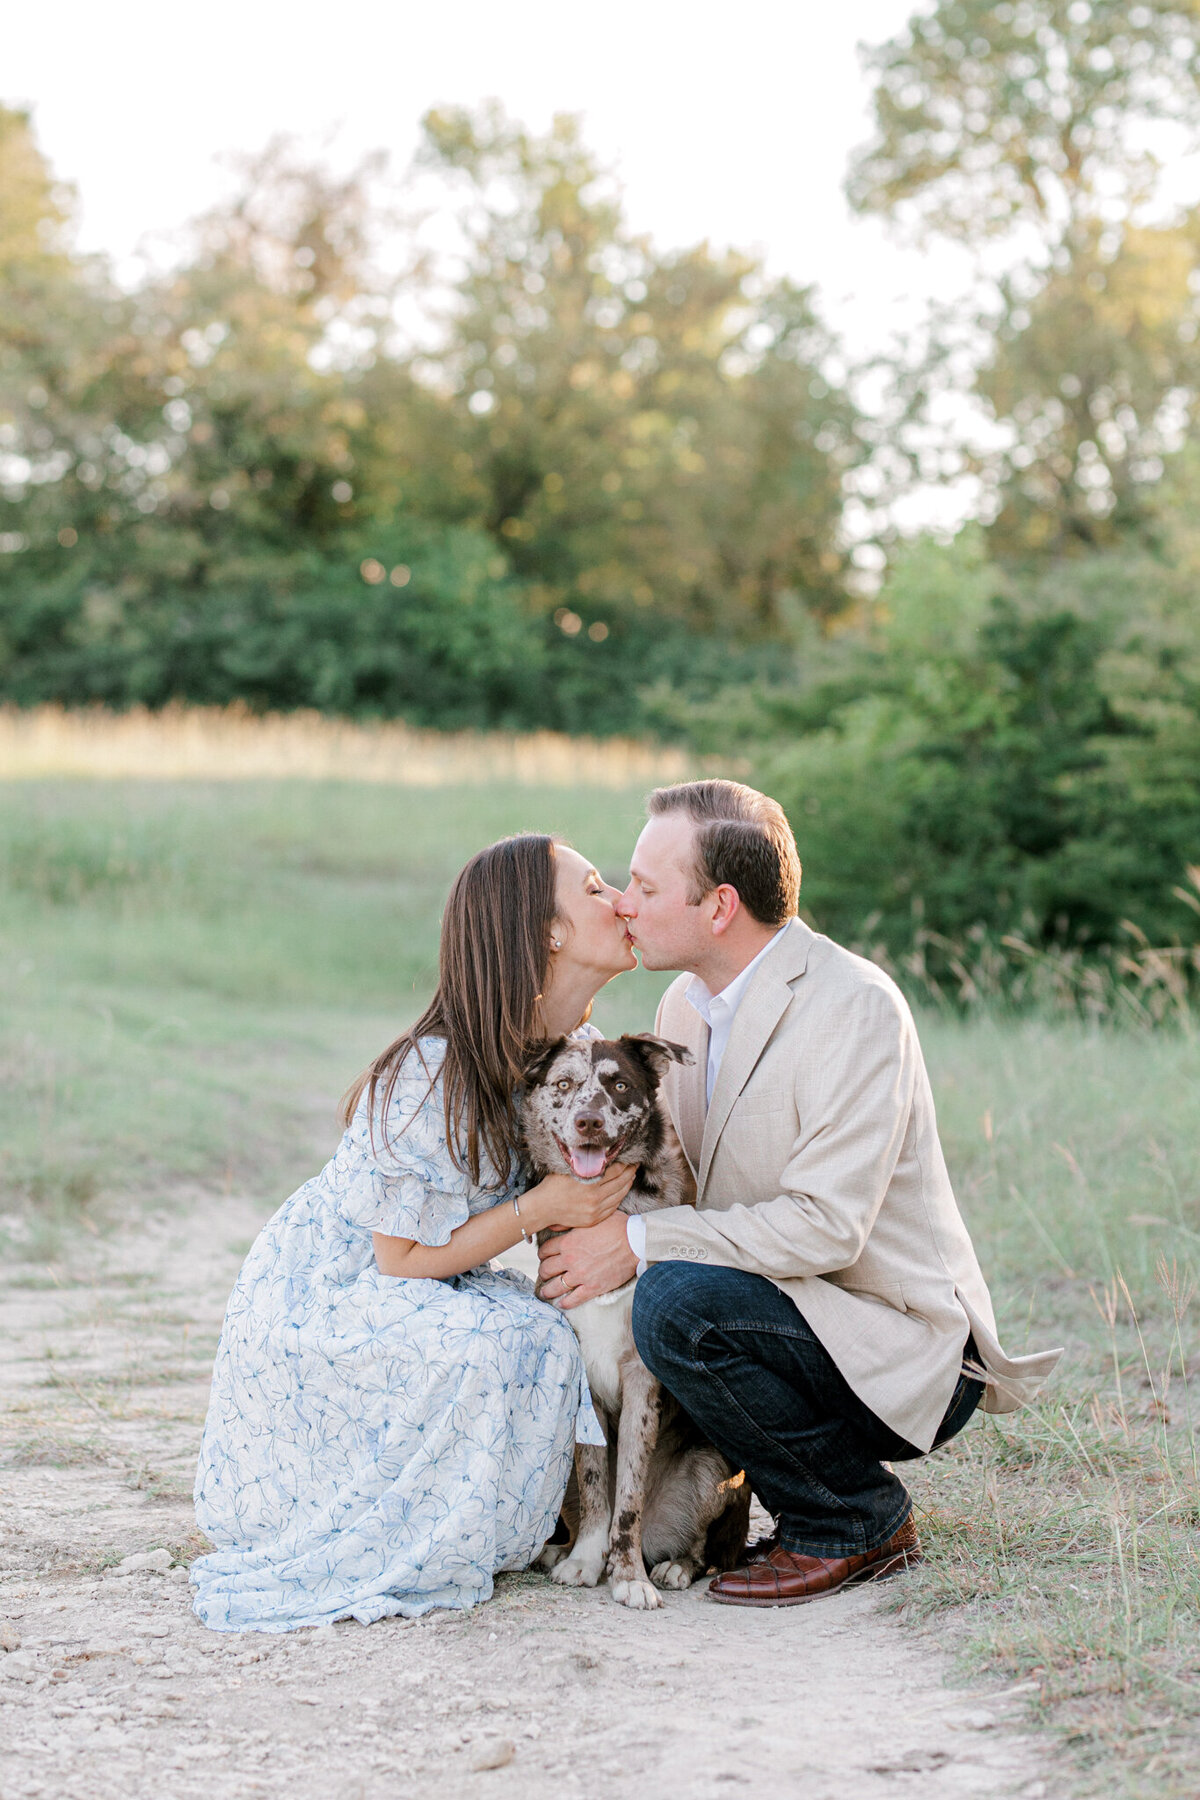 Mini Sessions at Norbuck Park | Dallas Portrait Photographer | Sami Kathryn Photography-45